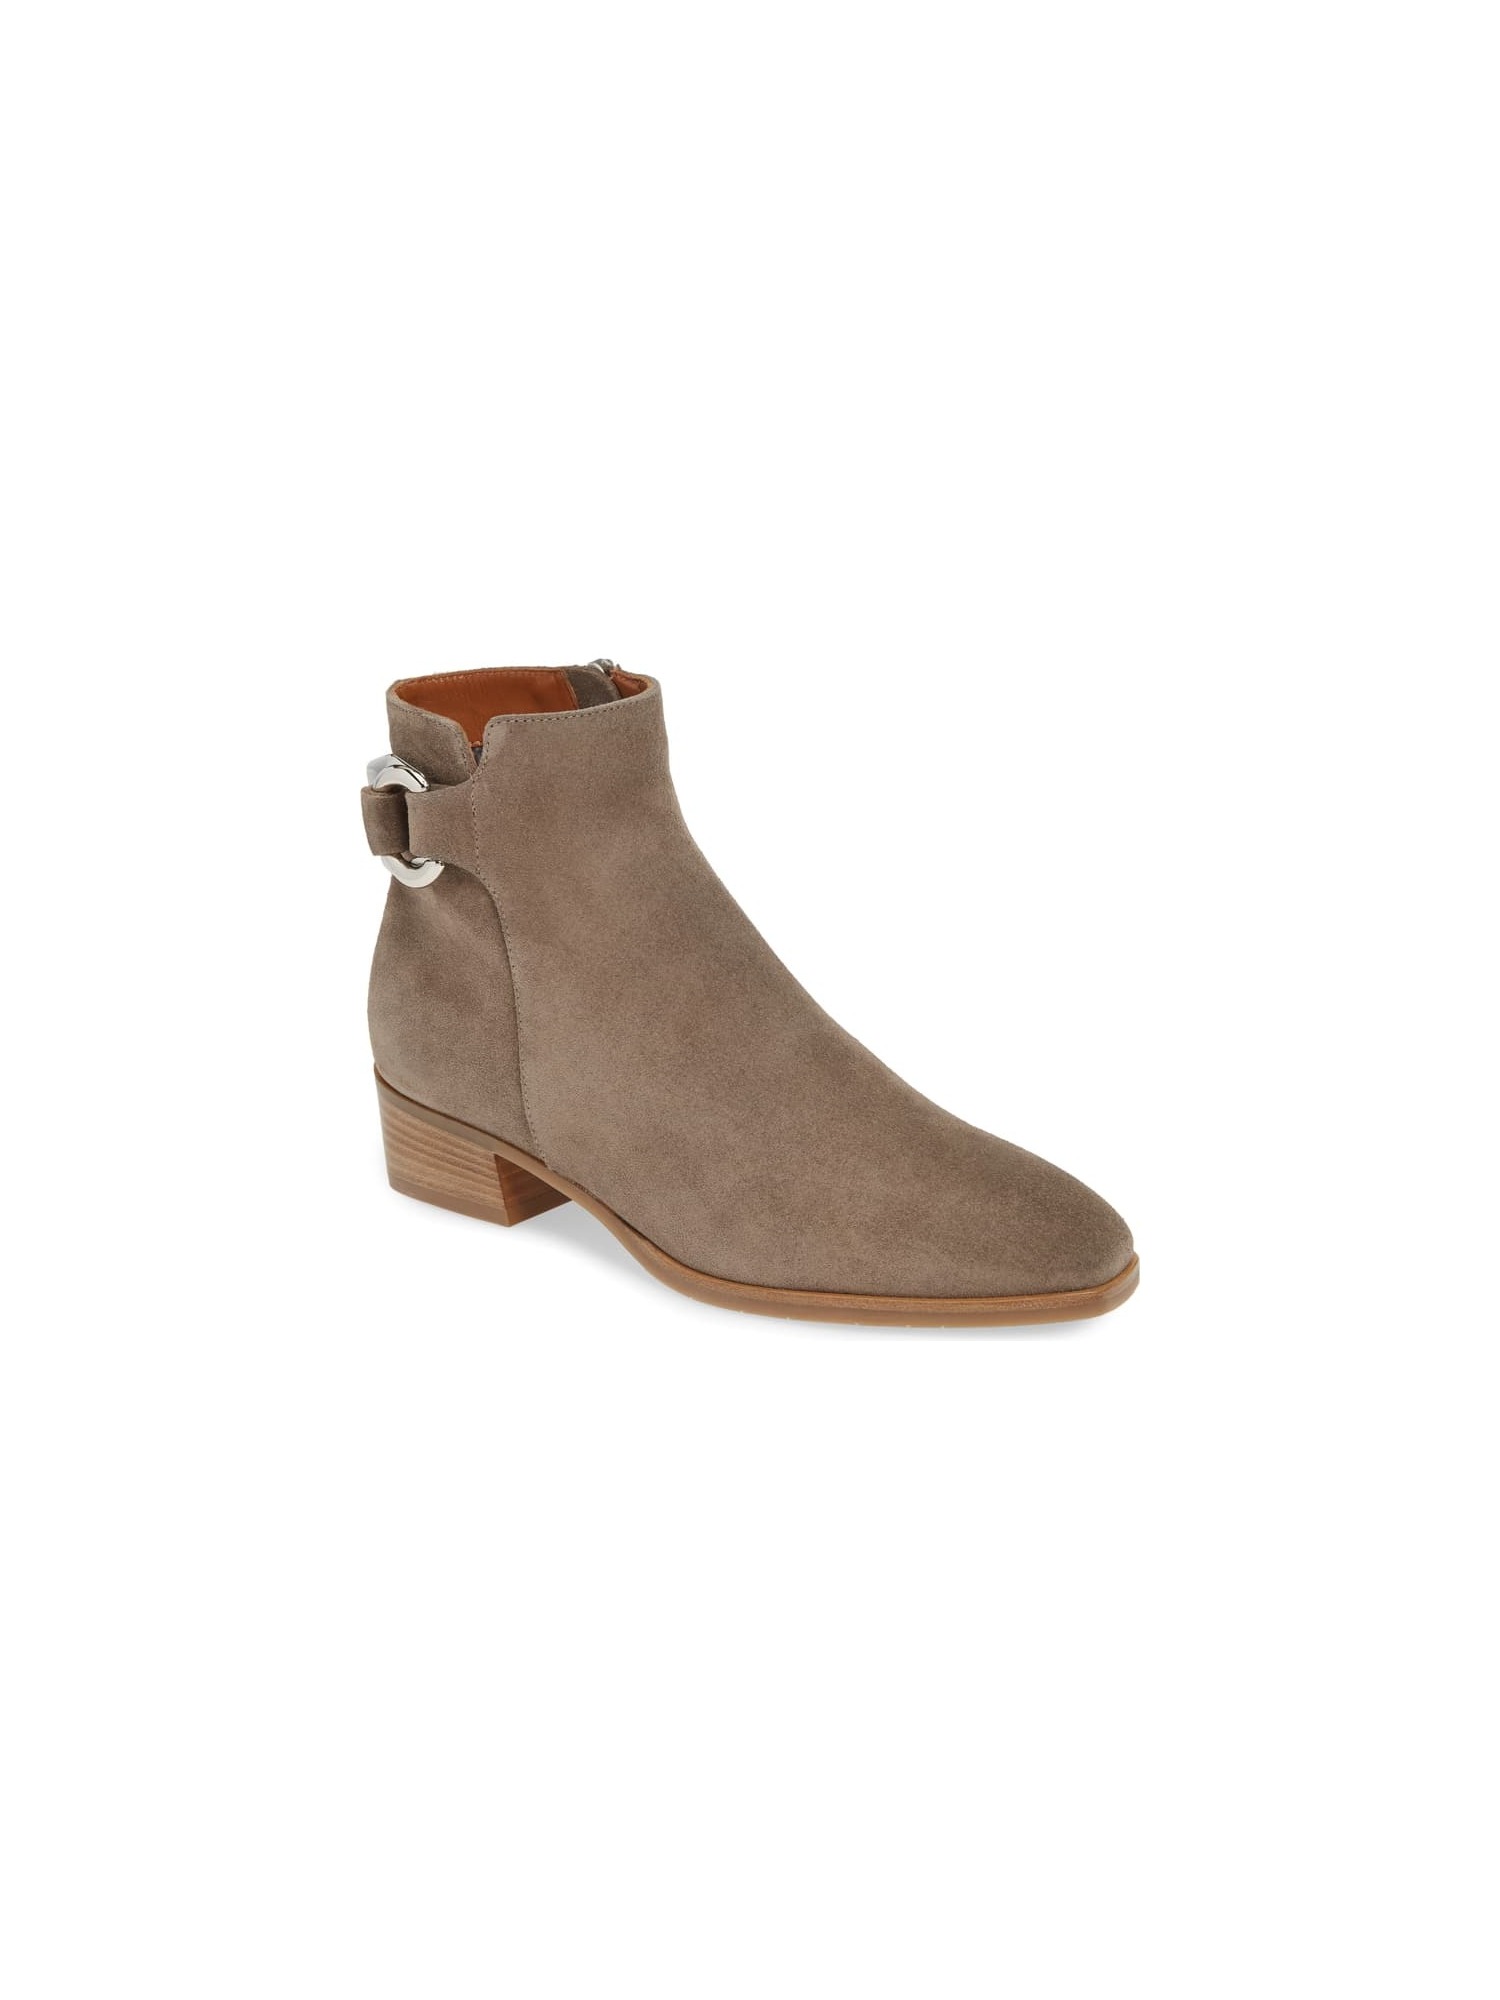 booties cyber monday